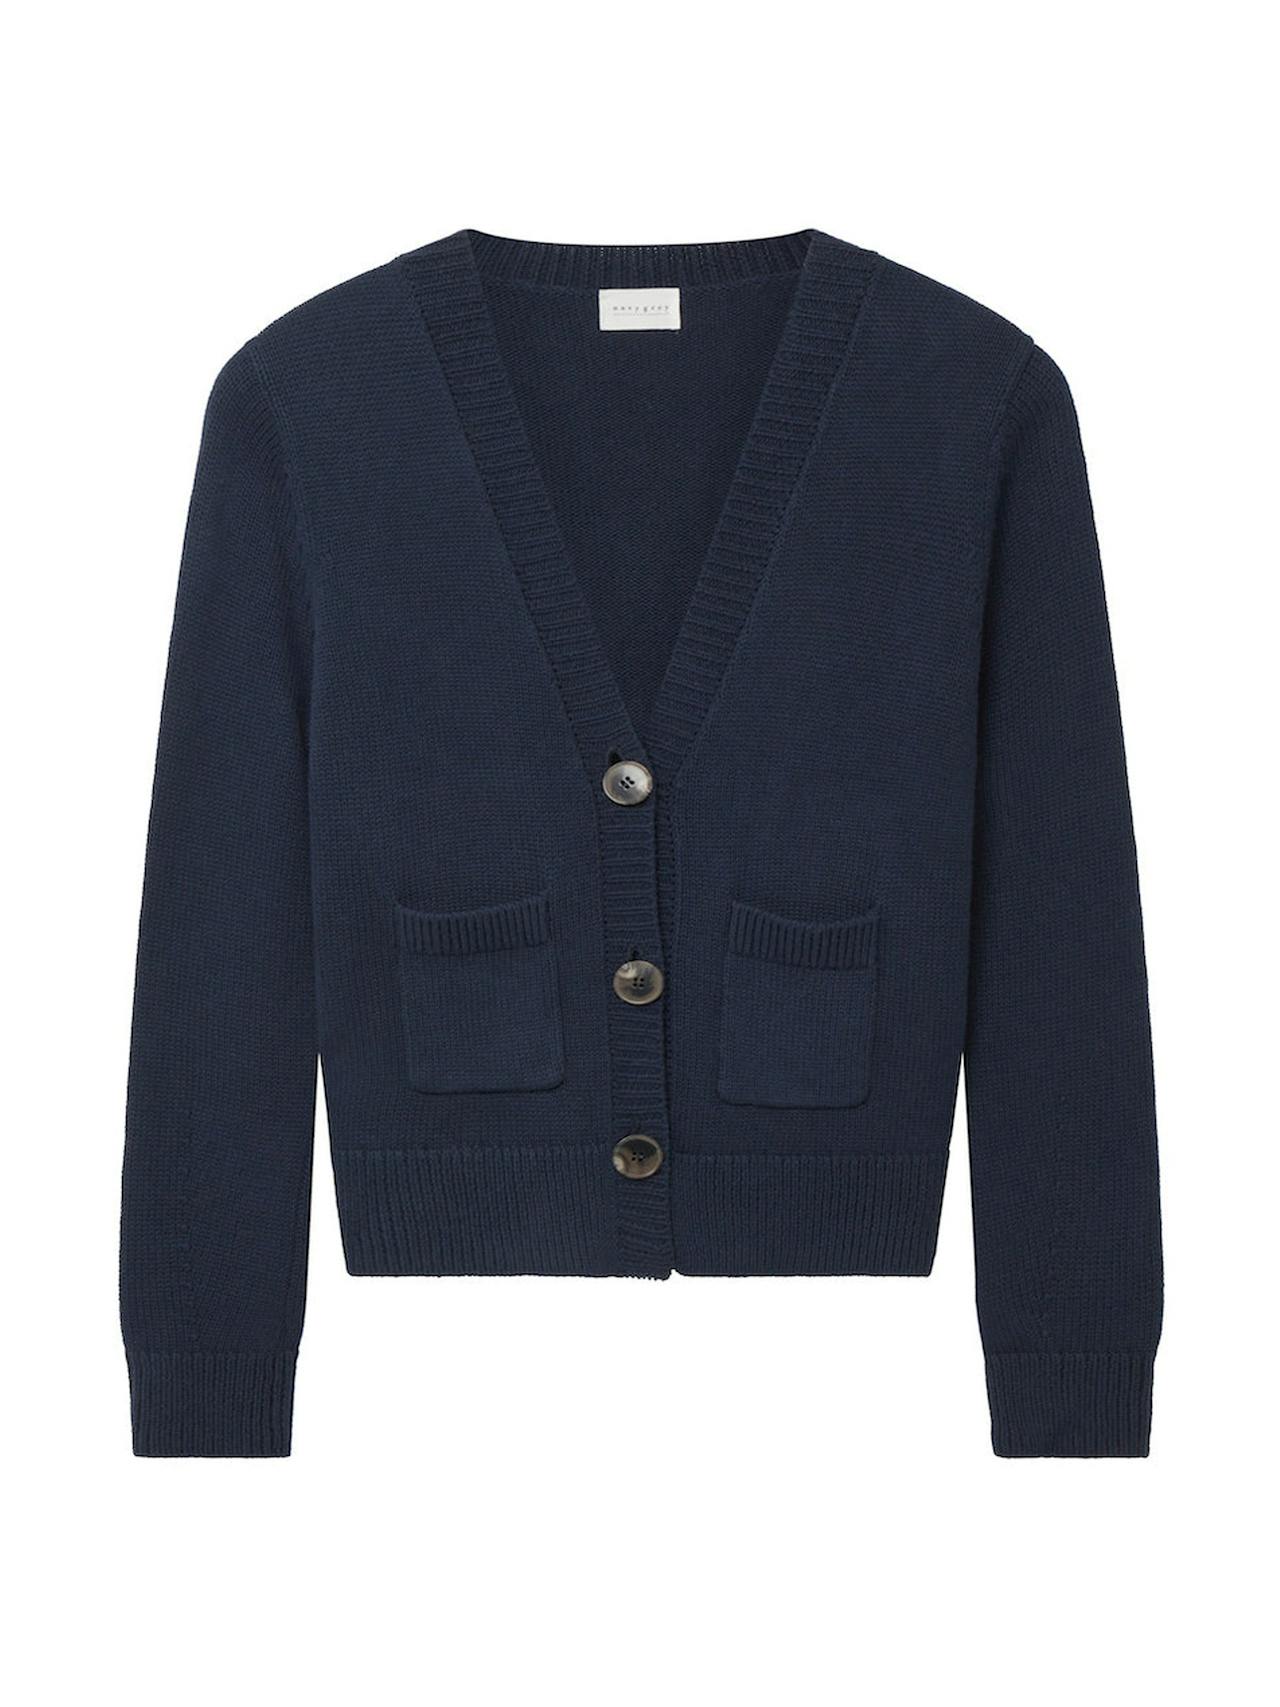 The Boxy cardigan in navy